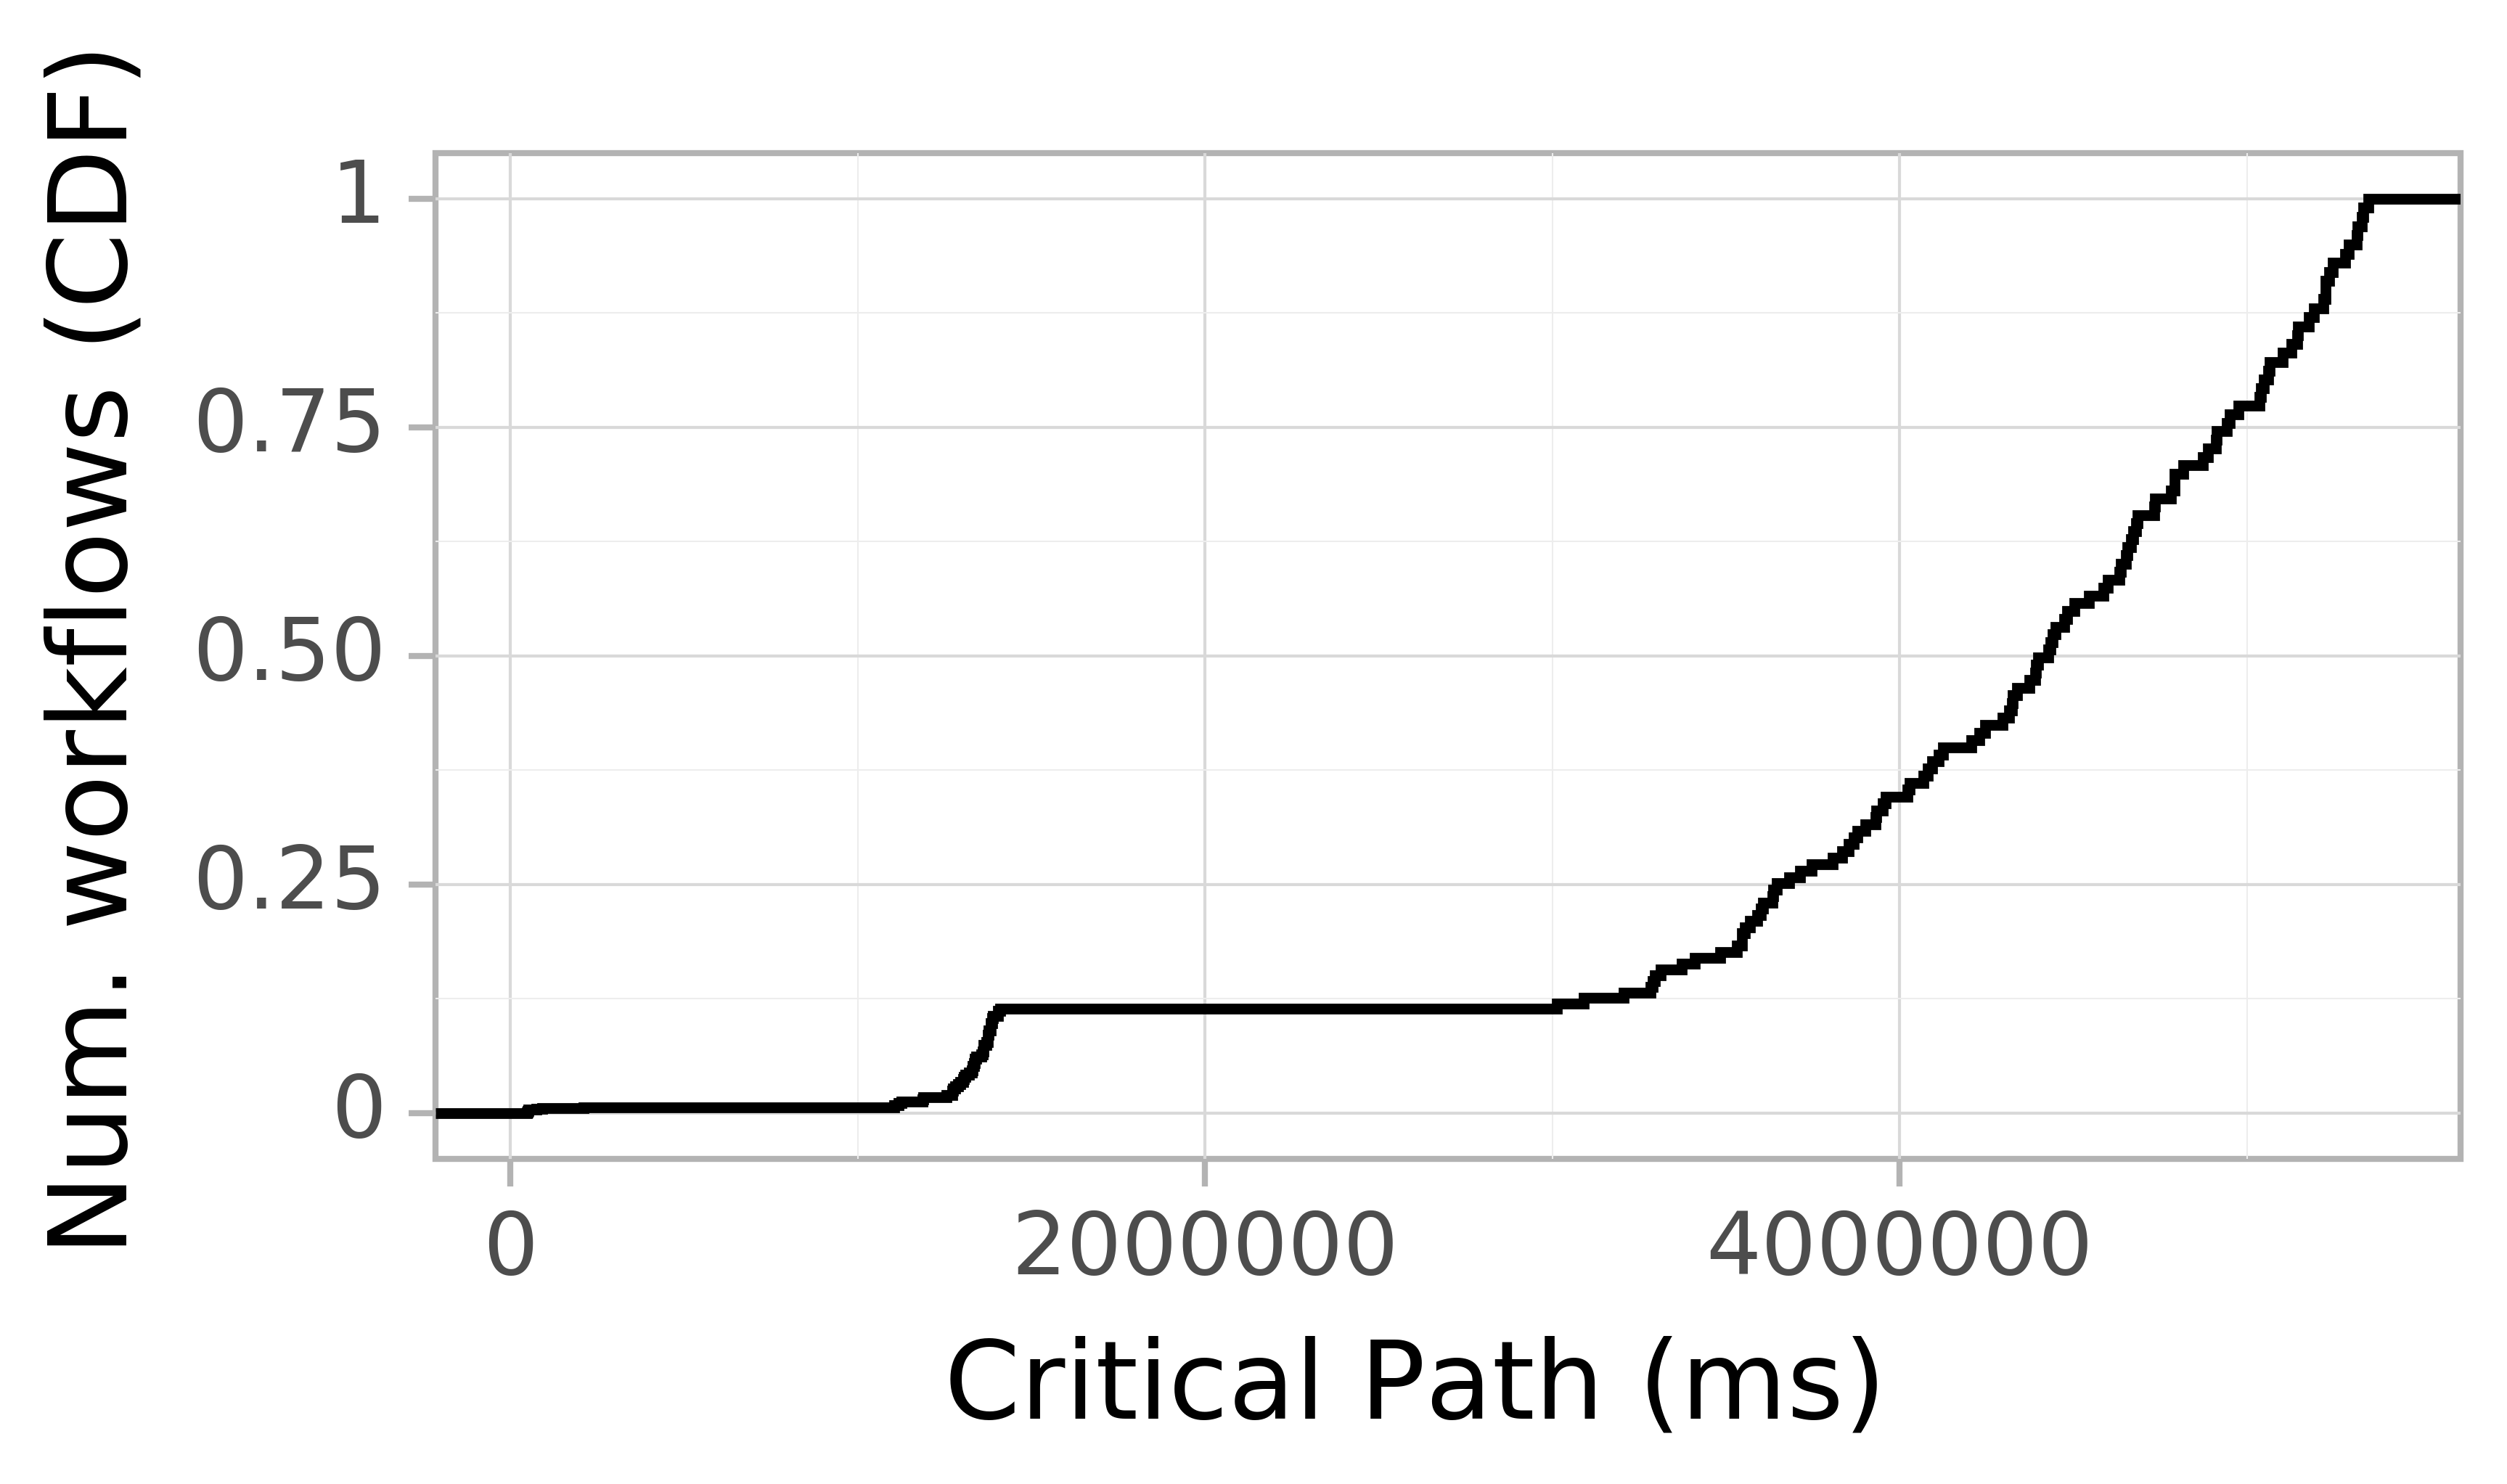 Job runtime CDF graph for the spec_trace-1 trace.